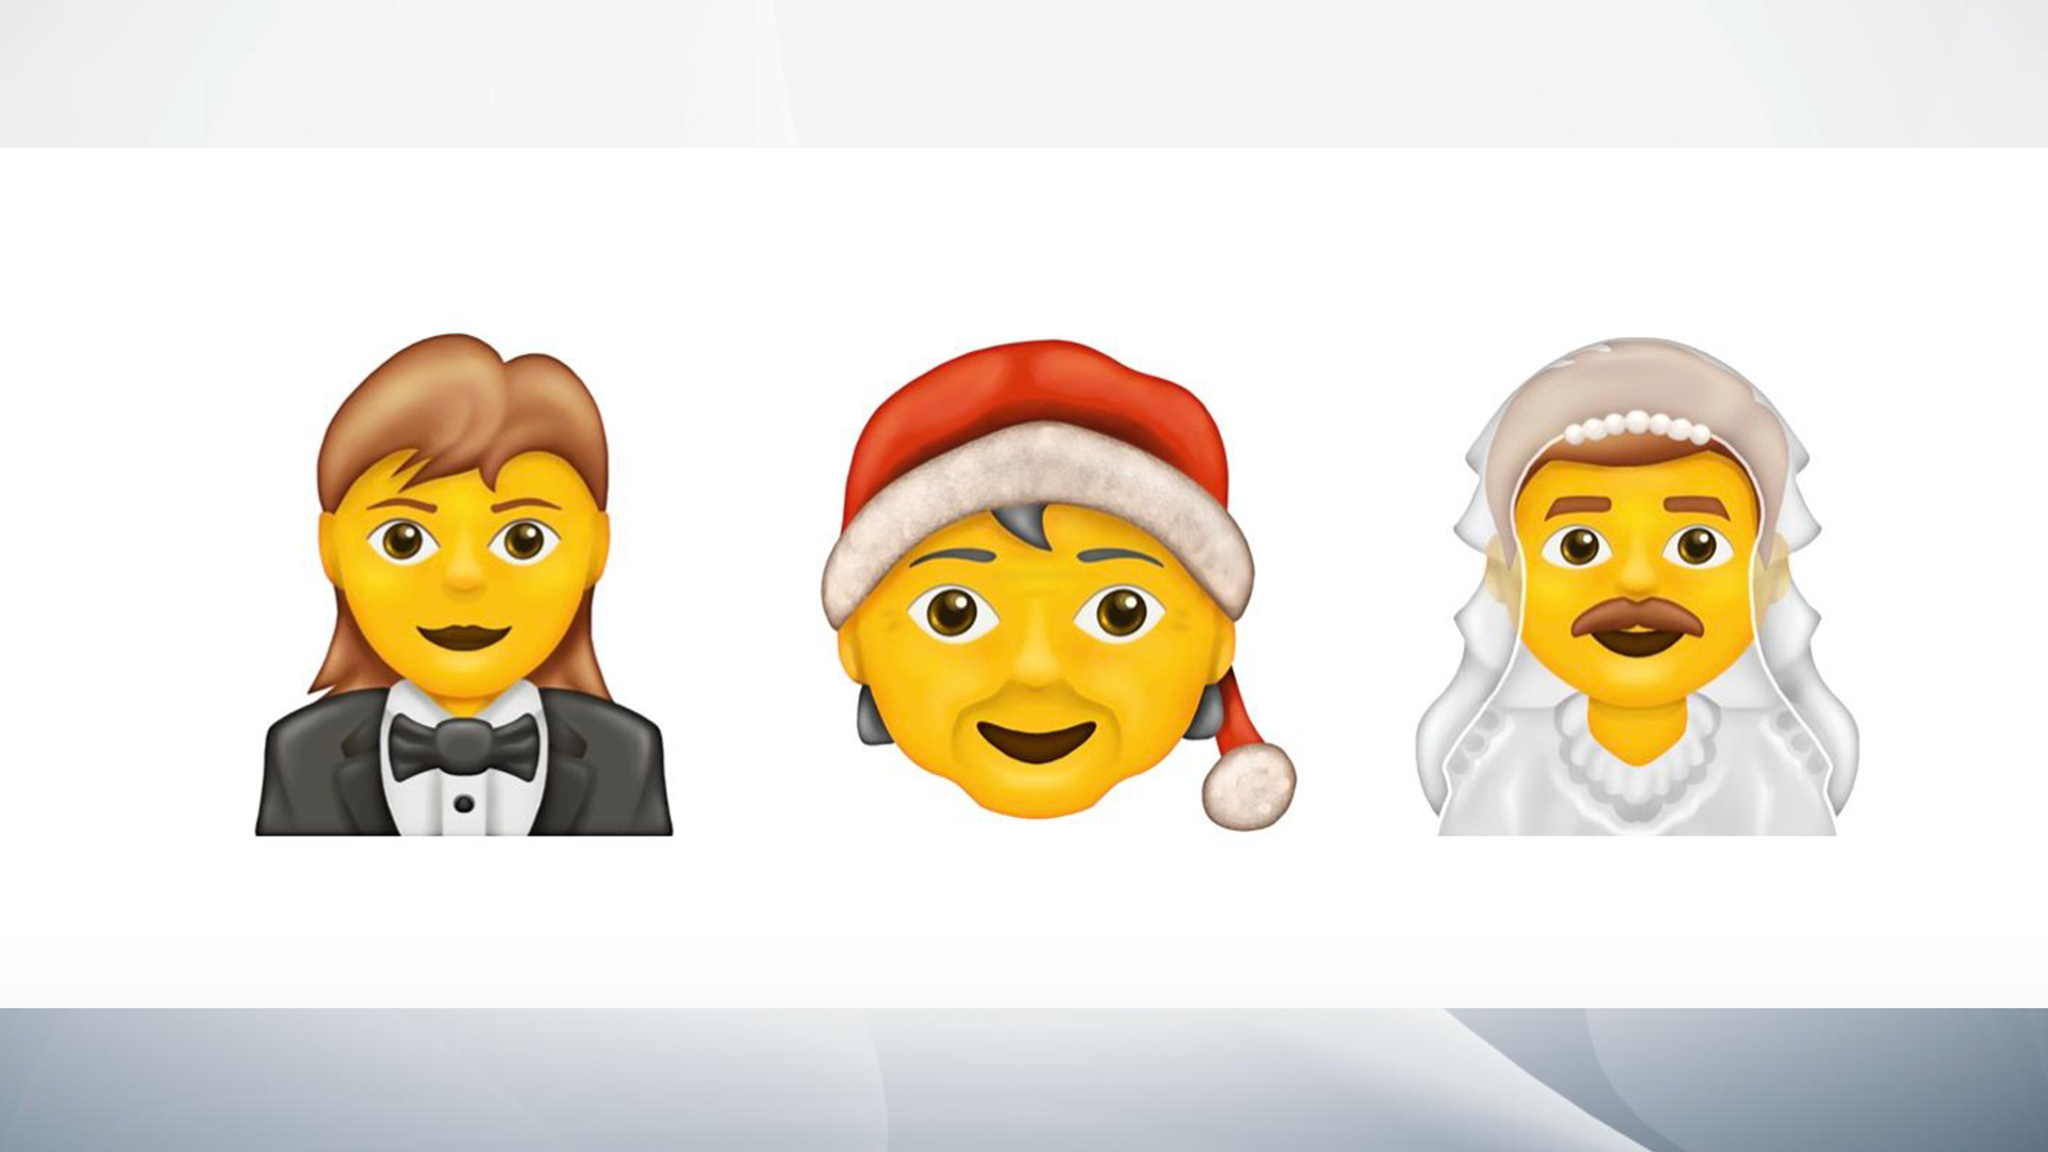 Download Gender Neutral Santa And Crying Smiley Face Among 117 New Emojis Science Tech News Sky News